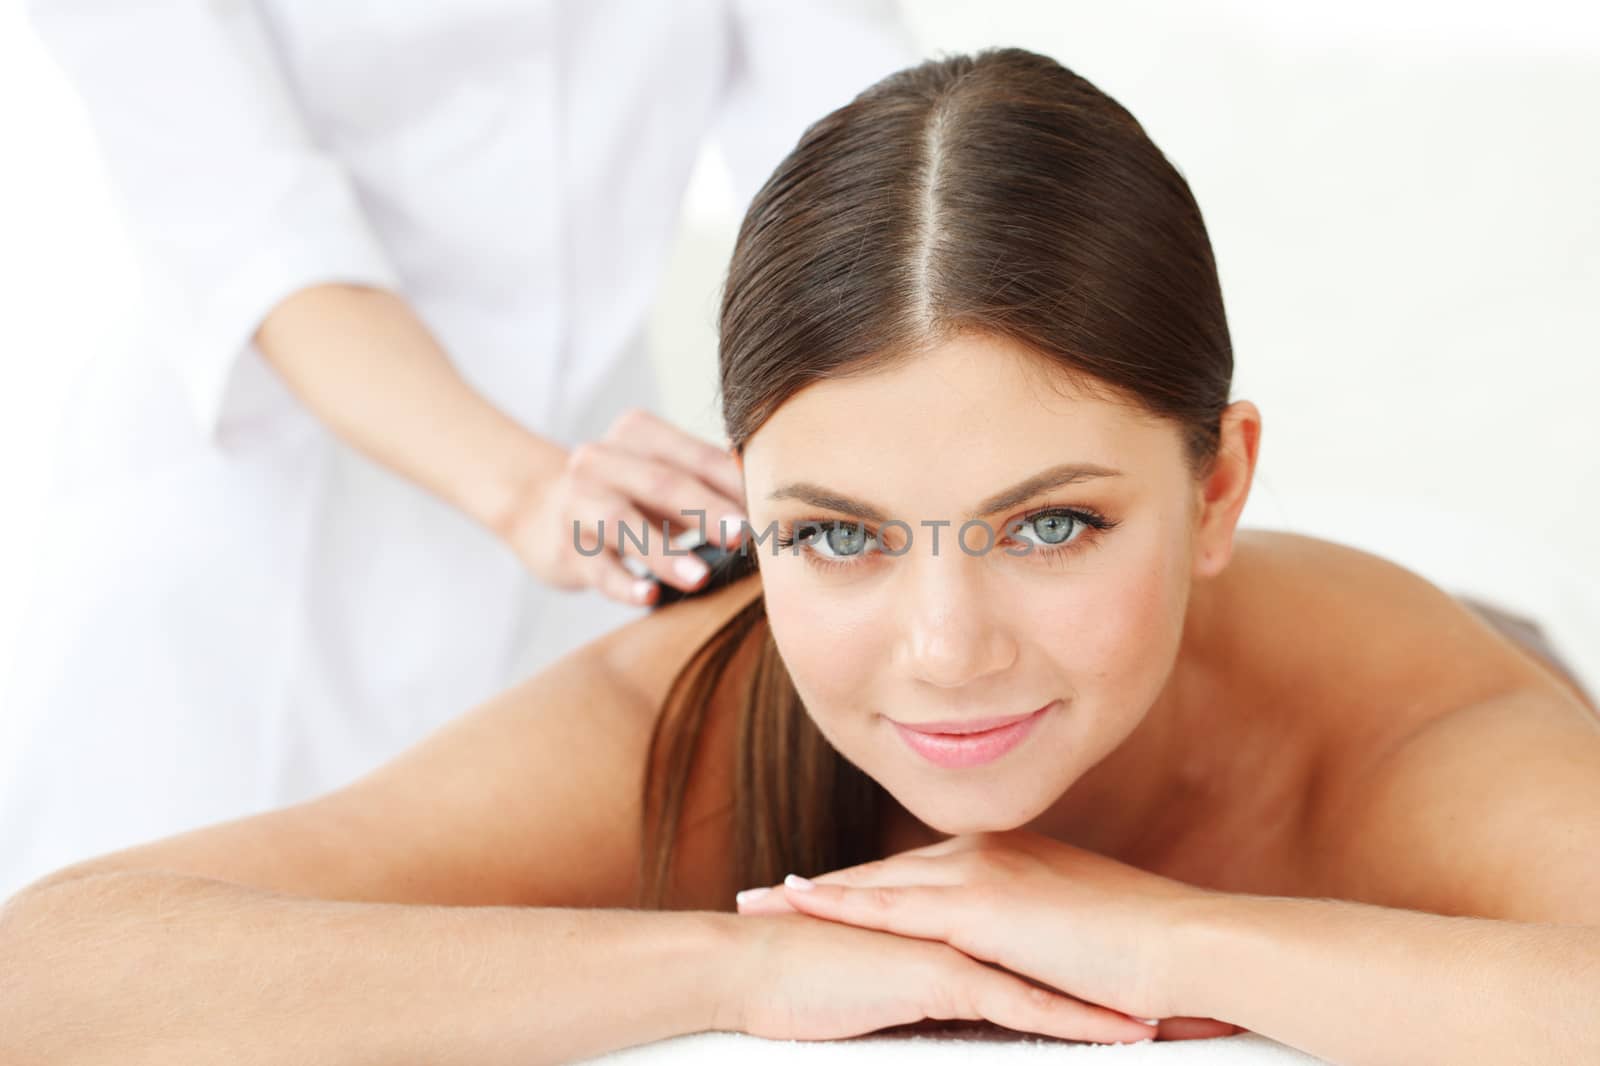 woman having stone therapy at spa session